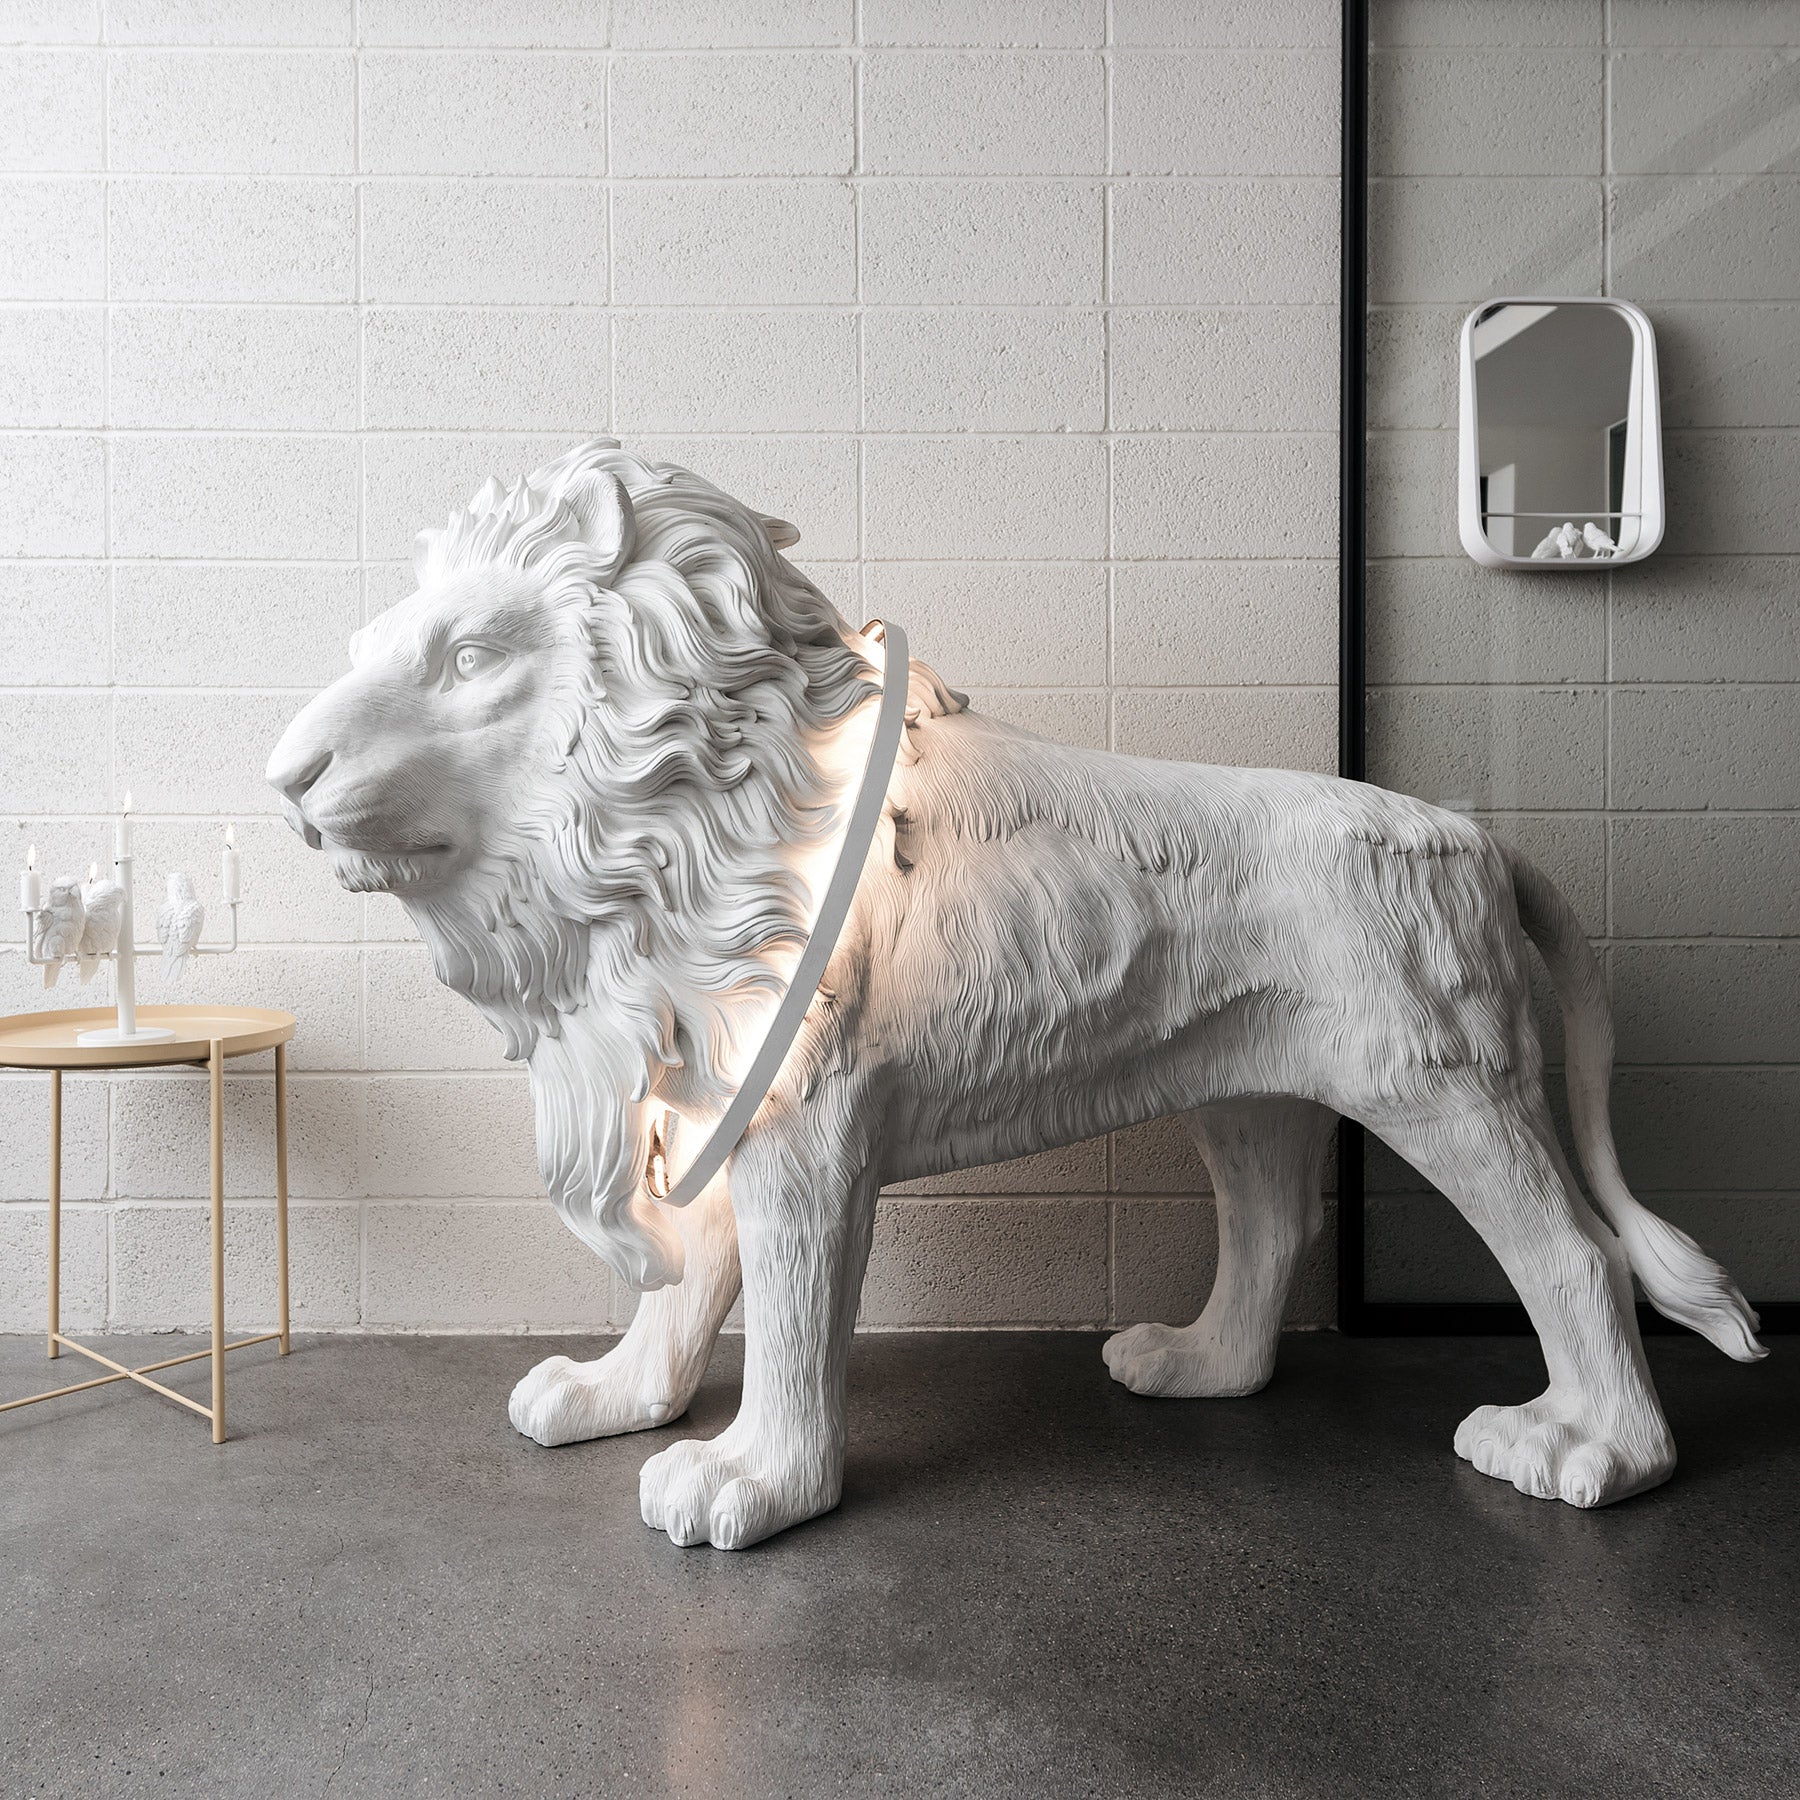 Lion Lamp with Home Decor Statue